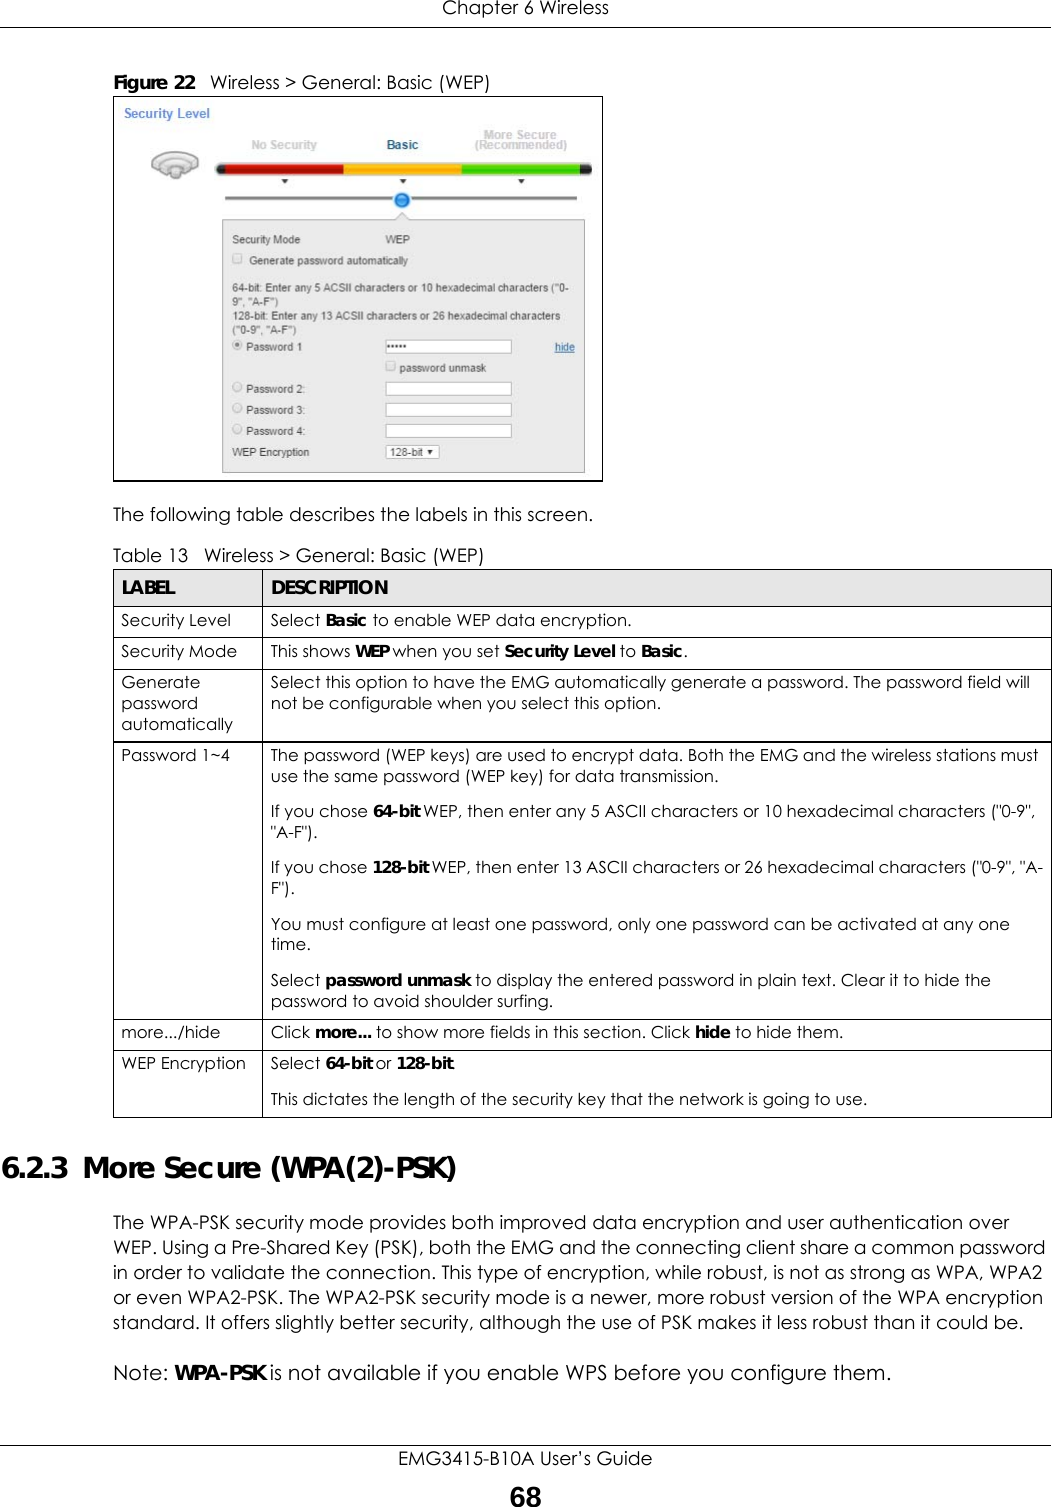 Chapter 6 WirelessEMG3415-B10A User’s Guide68Figure 22   Wireless &gt; General: Basic (WEP) The following table describes the labels in this screen. 6.2.3  More Secure (WPA(2)-PSK)The WPA-PSK security mode provides both improved data encryption and user authentication over WEP. Using a Pre-Shared Key (PSK), both the EMG and the connecting client share a common password in order to validate the connection. This type of encryption, while robust, is not as strong as WPA, WPA2 or even WPA2-PSK. The WPA2-PSK security mode is a newer, more robust version of the WPA encryption standard. It offers slightly better security, although the use of PSK makes it less robust than it could be. Note: WPA-PSK is not available if you enable WPS before you configure them.Table 13   Wireless &gt; General: Basic (WEP)LABEL DESCRIPTIONSecurity Level Select Basic to enable WEP data encryption.Security Mode This shows WEP when you set Security Level to Basic.Generate password automatically Select this option to have the EMG automatically generate a password. The password field will not be configurable when you select this option.Password 1~4 The password (WEP keys) are used to encrypt data. Both the EMG and the wireless stations must use the same password (WEP key) for data transmission.If you chose 64-bit WEP, then enter any 5 ASCII characters or 10 hexadecimal characters (&quot;0-9&quot;, &quot;A-F&quot;).If you chose 128-bit WEP, then enter 13 ASCII characters or 26 hexadecimal characters (&quot;0-9&quot;, &quot;A-F&quot;). You must configure at least one password, only one password can be activated at any one time. Select password unmask to display the entered password in plain text. Clear it to hide the password to avoid shoulder surfing.more.../hide Click more... to show more fields in this section. Click hide to hide them.WEP Encryption Select 64-bit or 128-bit.This dictates the length of the security key that the network is going to use.